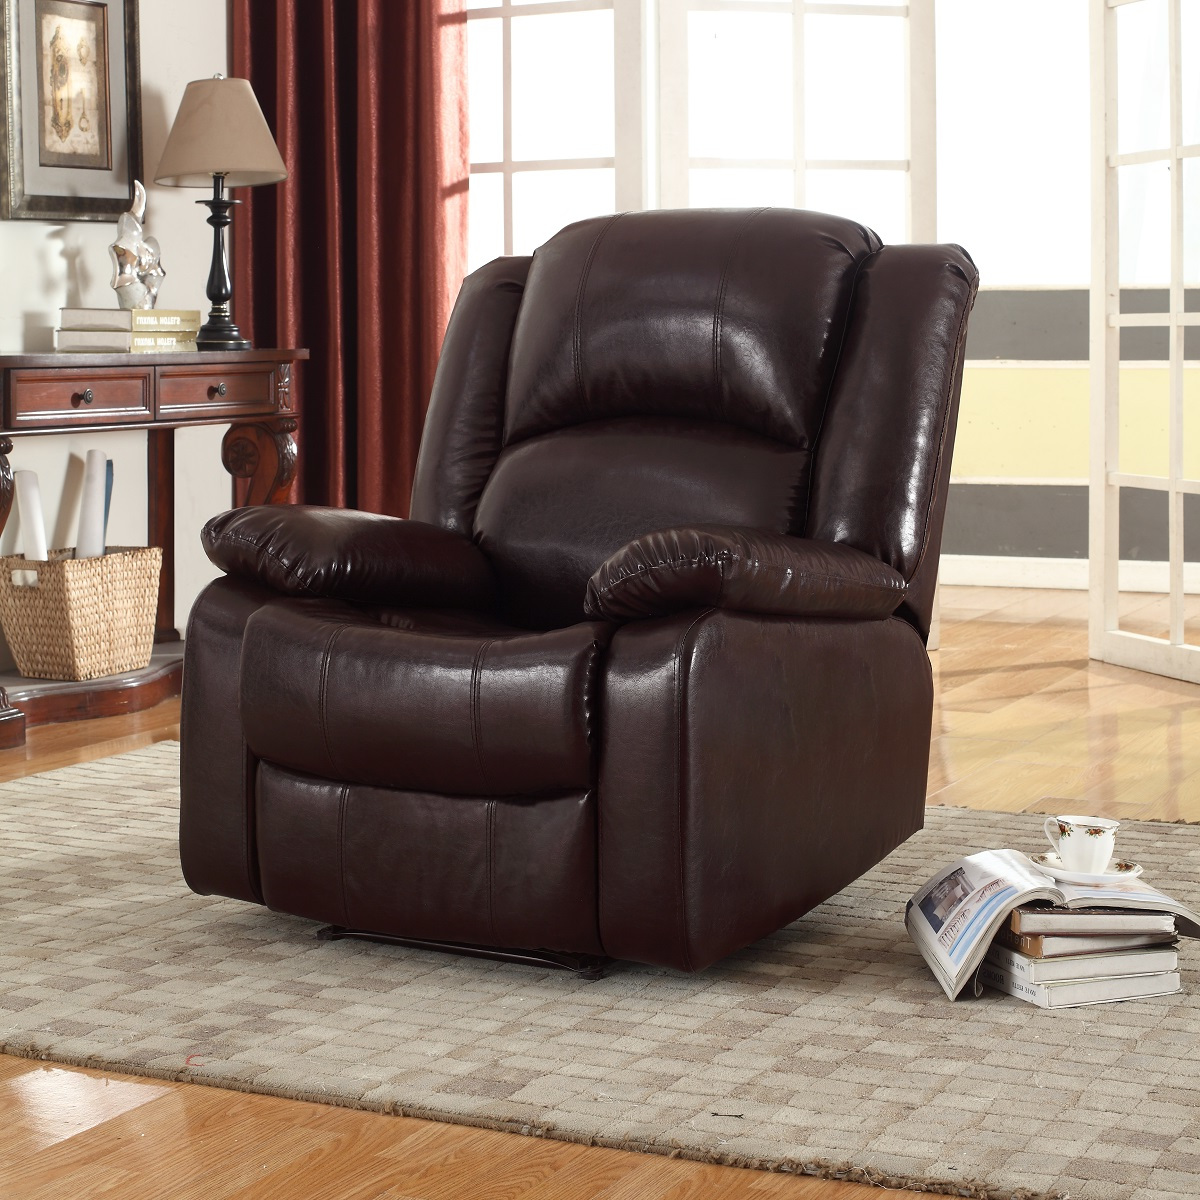 Leonel Signature Bonded Leather Glider Recliner, Multiple Colors - image 3 of 8